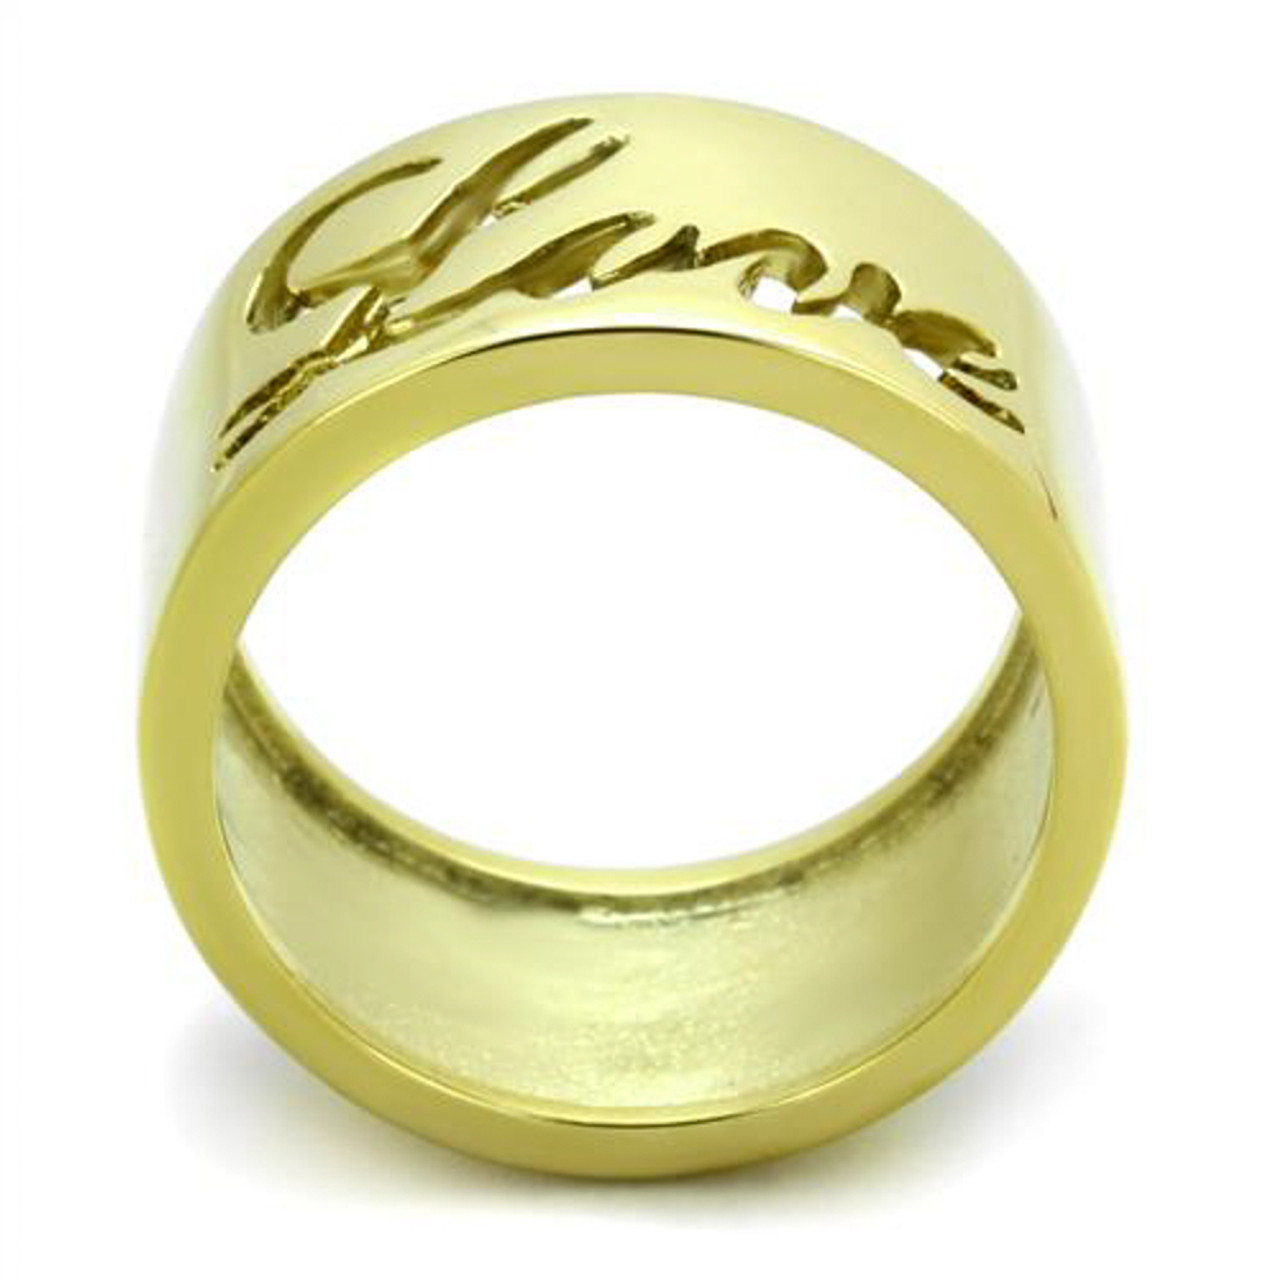 Buy CEYLONMINE- Golden Plated Romantic Love Band Ring for Men & Women Girls  (Gold) at Amazon.in